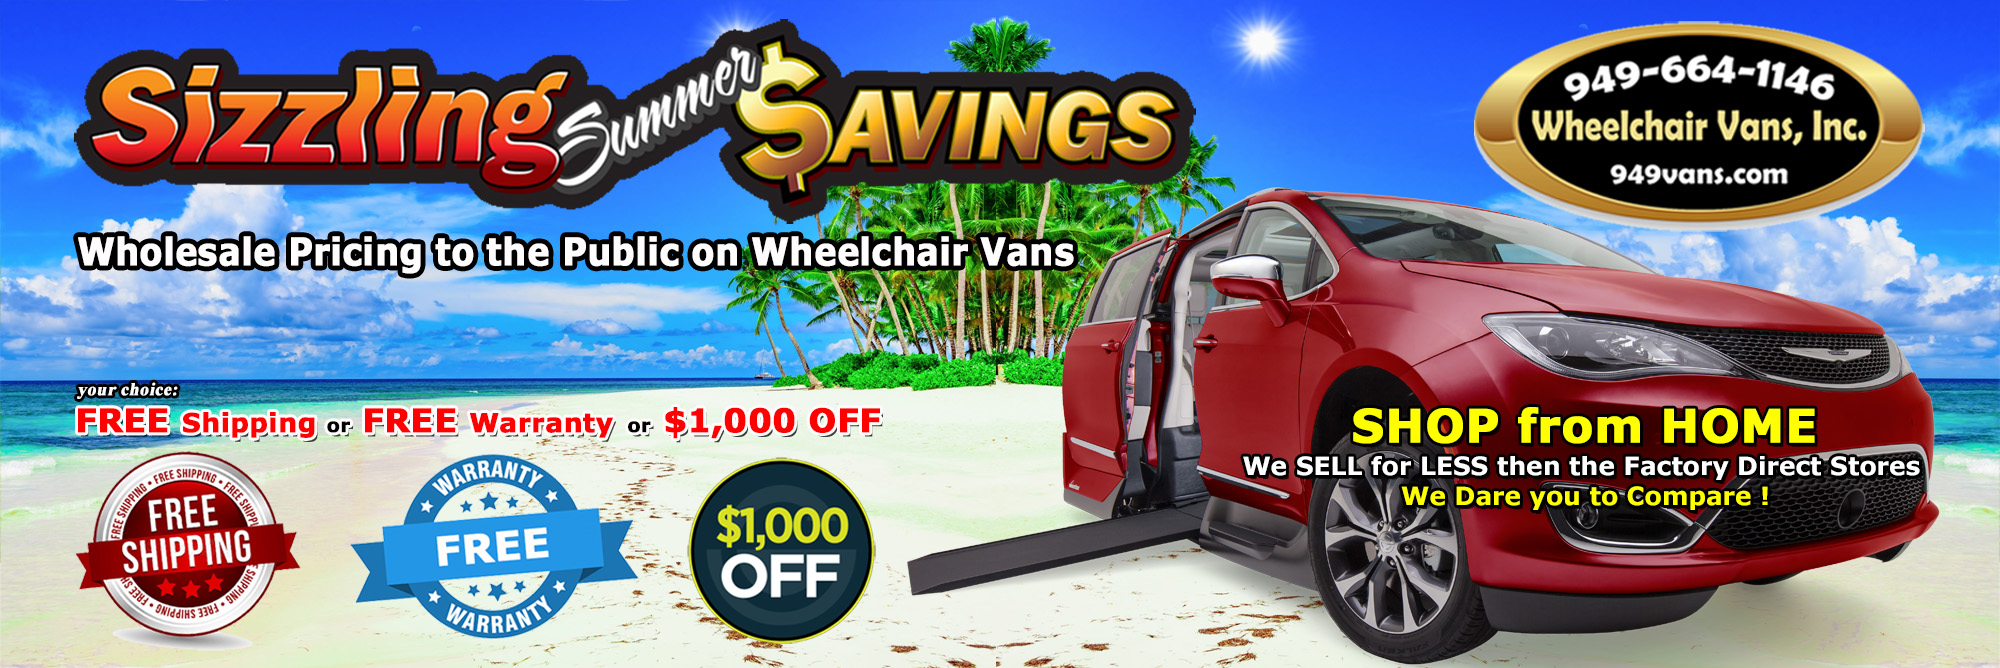 Super Sizzling Summer Specials 2022 Wheelchair Van Sale Temperatures rise we lower our prices !!!